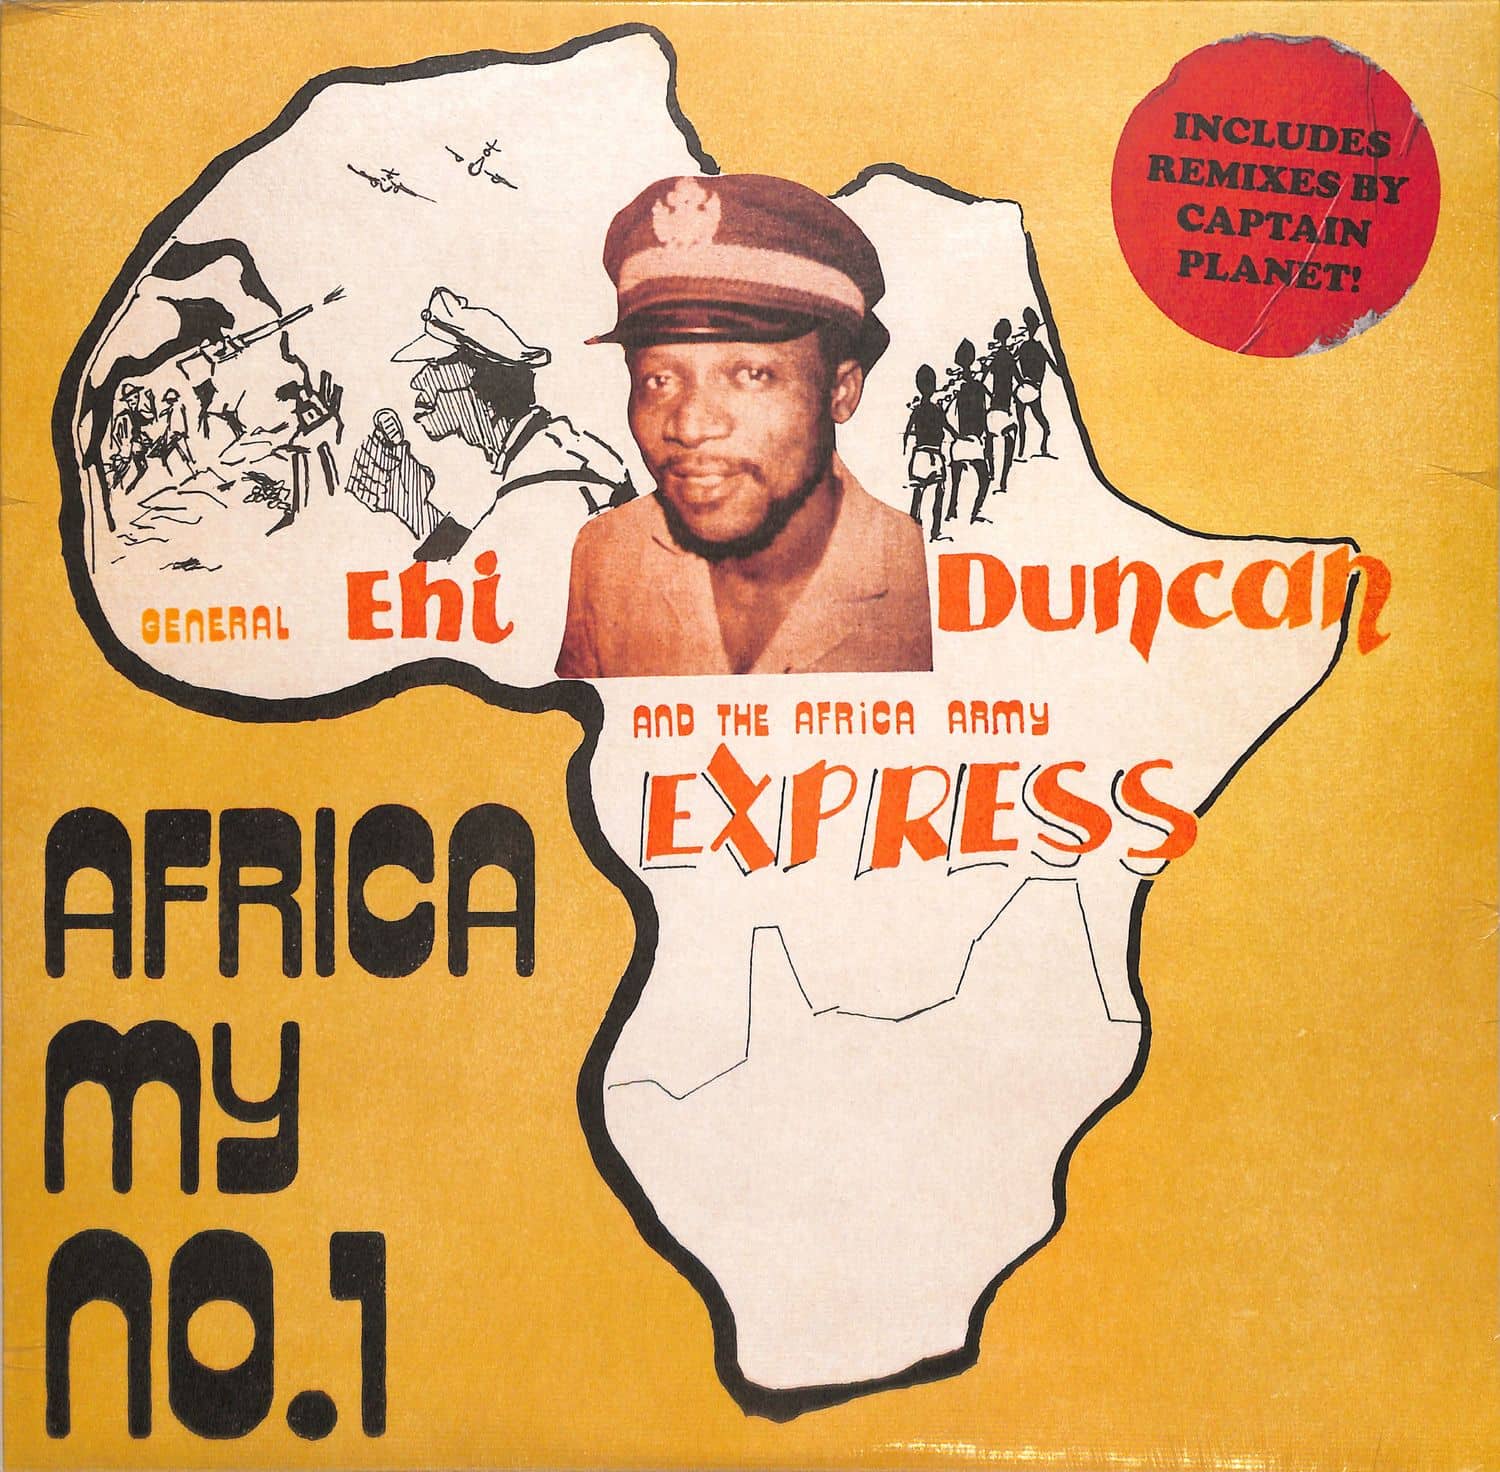 General Ehi Duncan & The Africa Army Express - AFRICA 